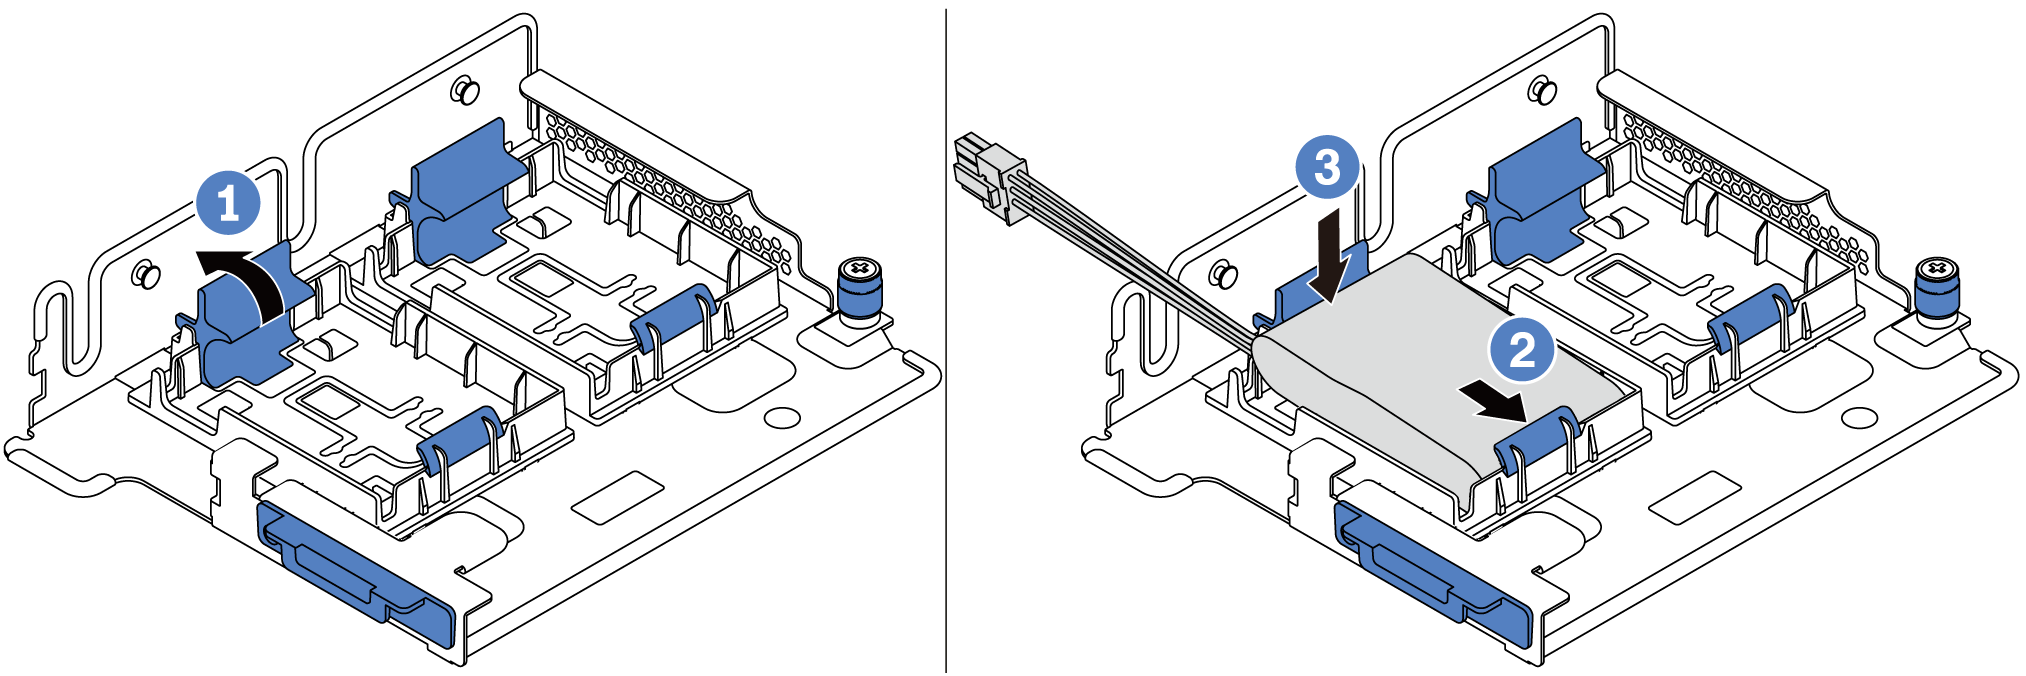 Install a super capacitor module on the M.2/riser support bracket